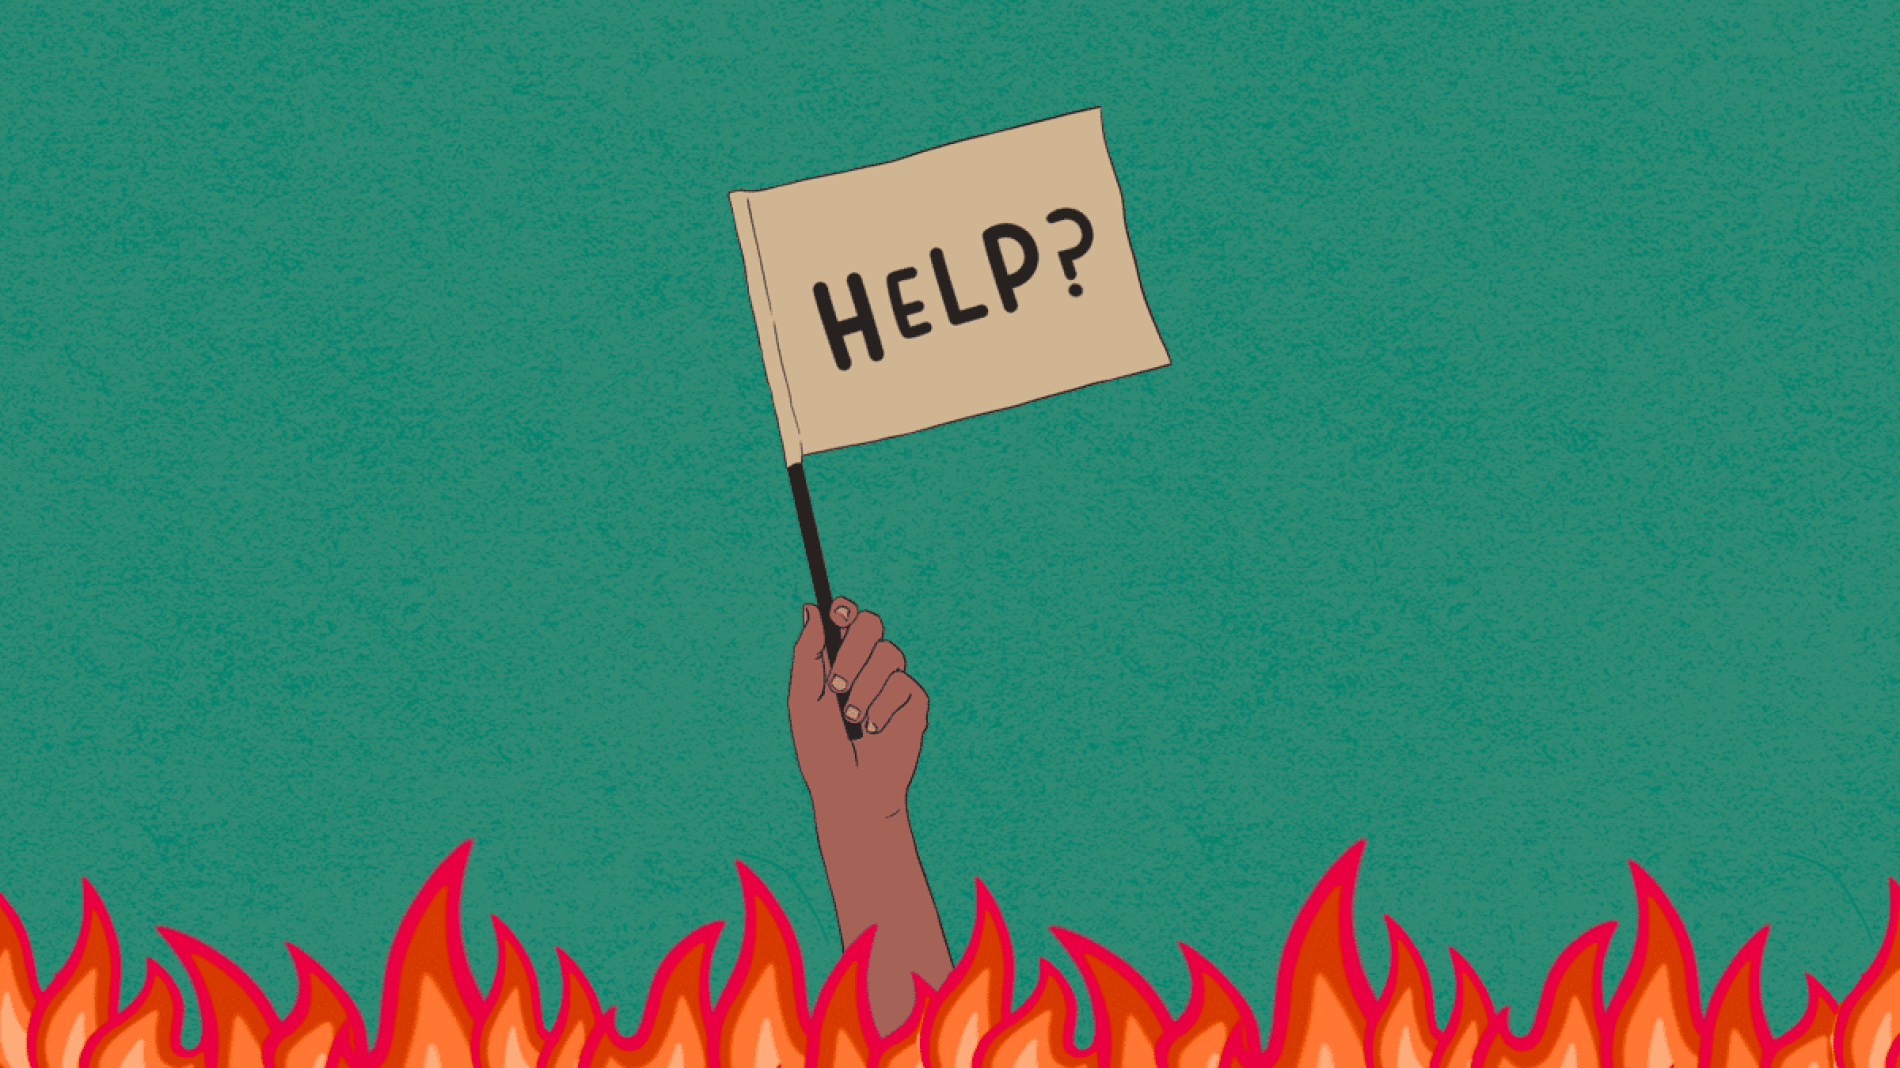 Illustration of a hand coming out of flames holding a sign that says help - burnout support